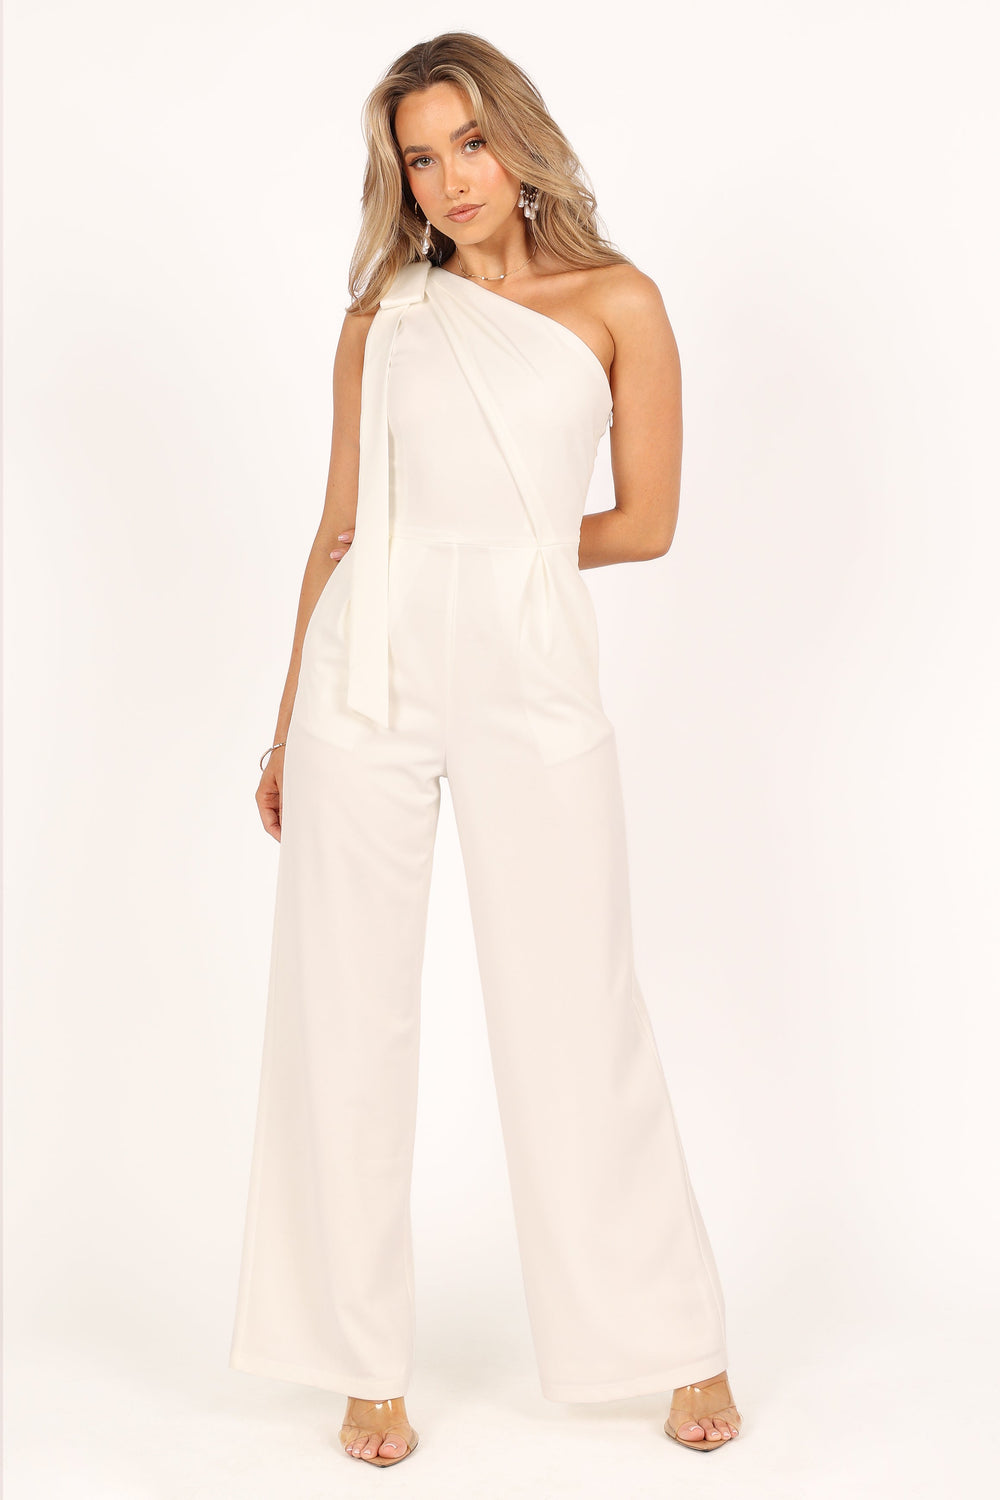 Petal and Pup USA Rompers Sadie One Shoulder Jumpsuit - White